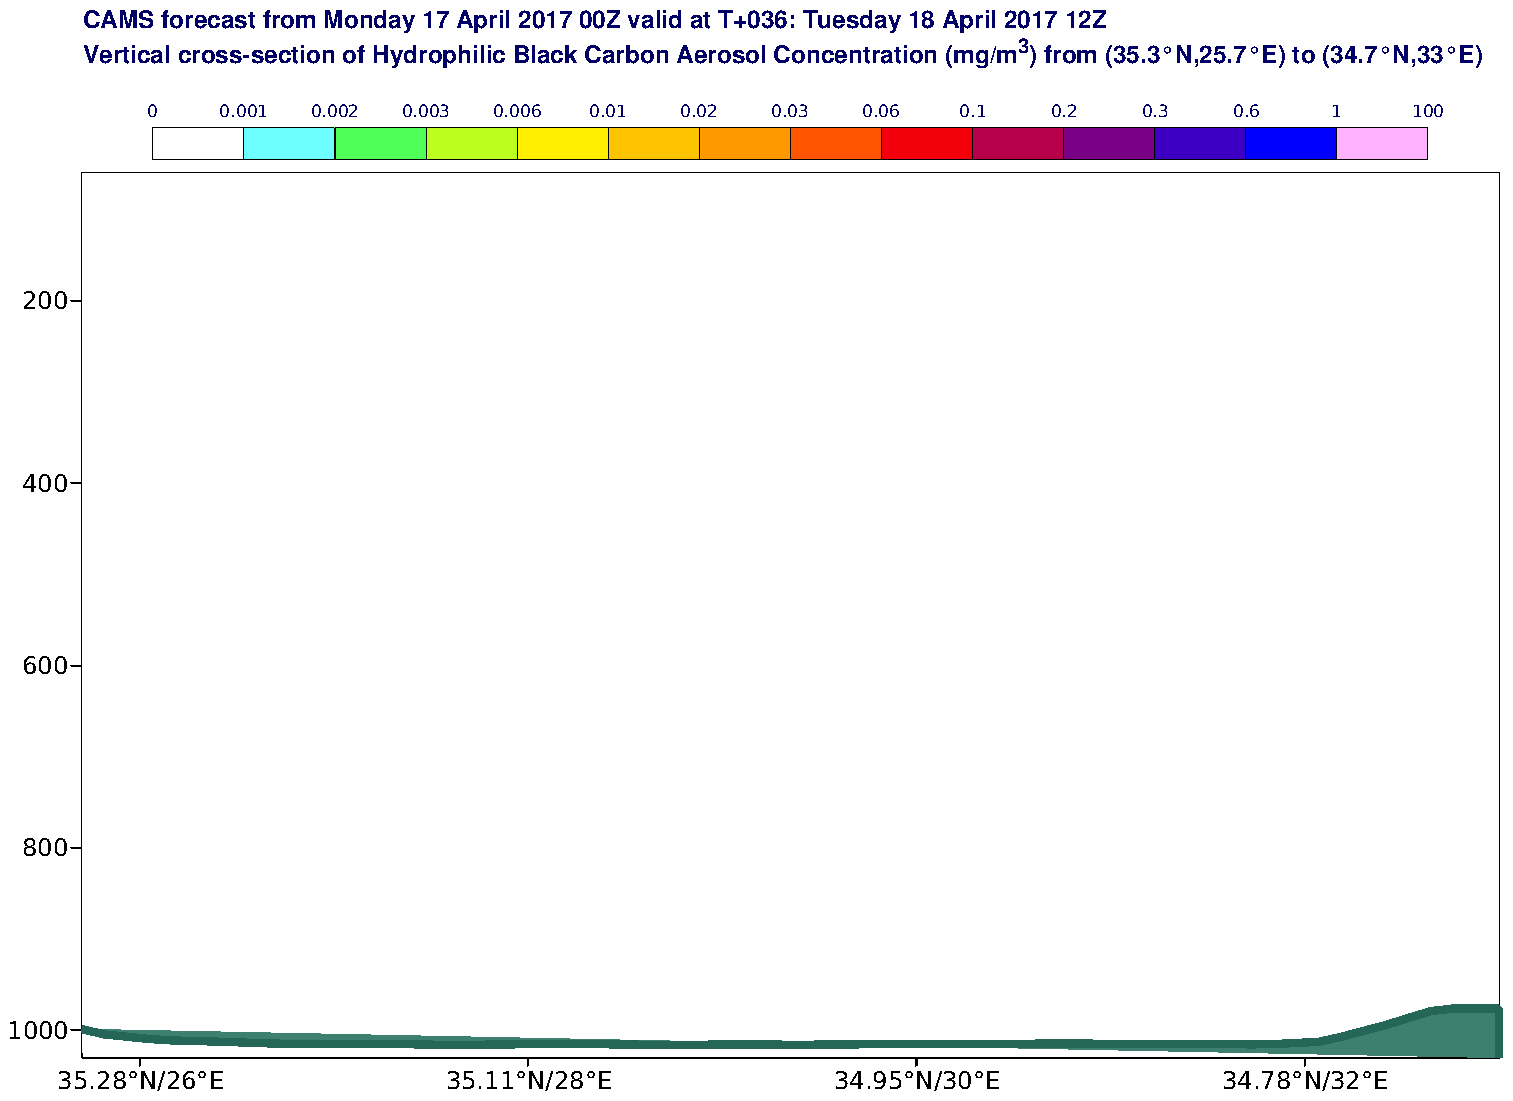 Vertical cross-section of Hydrophilic Black Carbon Aerosol Concentration (mg/m3) valid at T36 - 2017-04-18 12:00